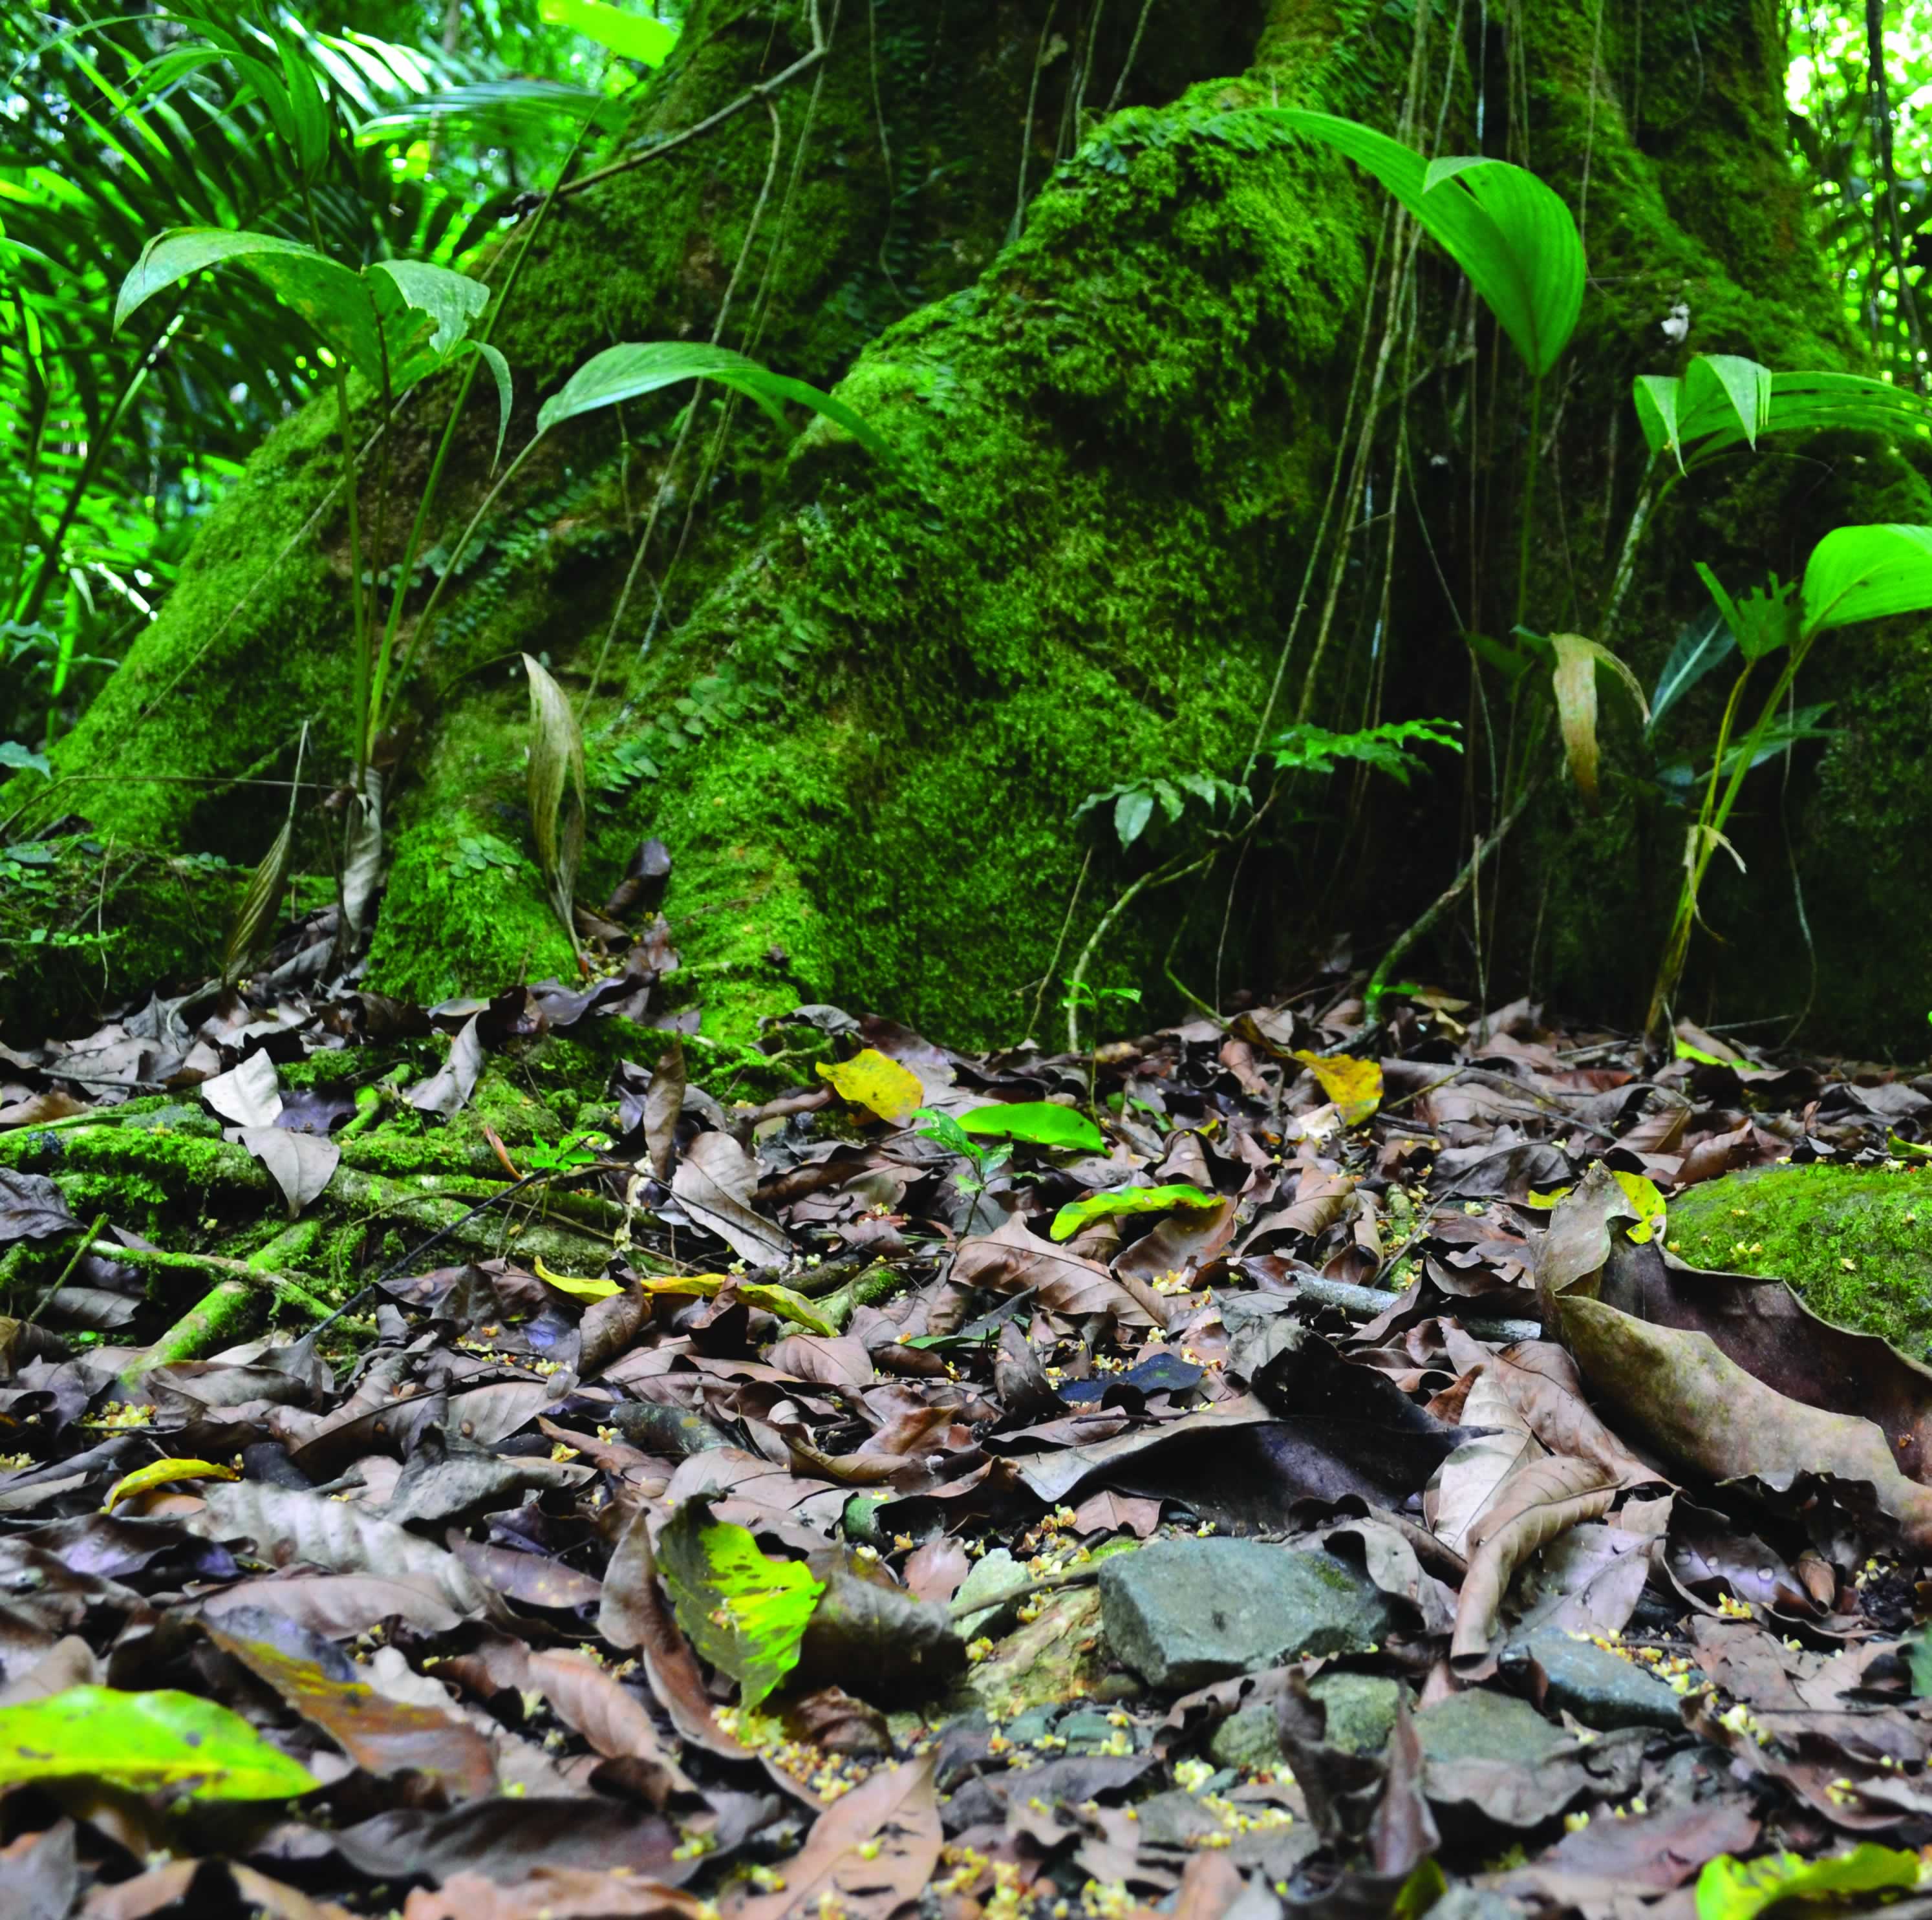 Image: Leaf litter in Puerto Rico's El Yunque National Forest